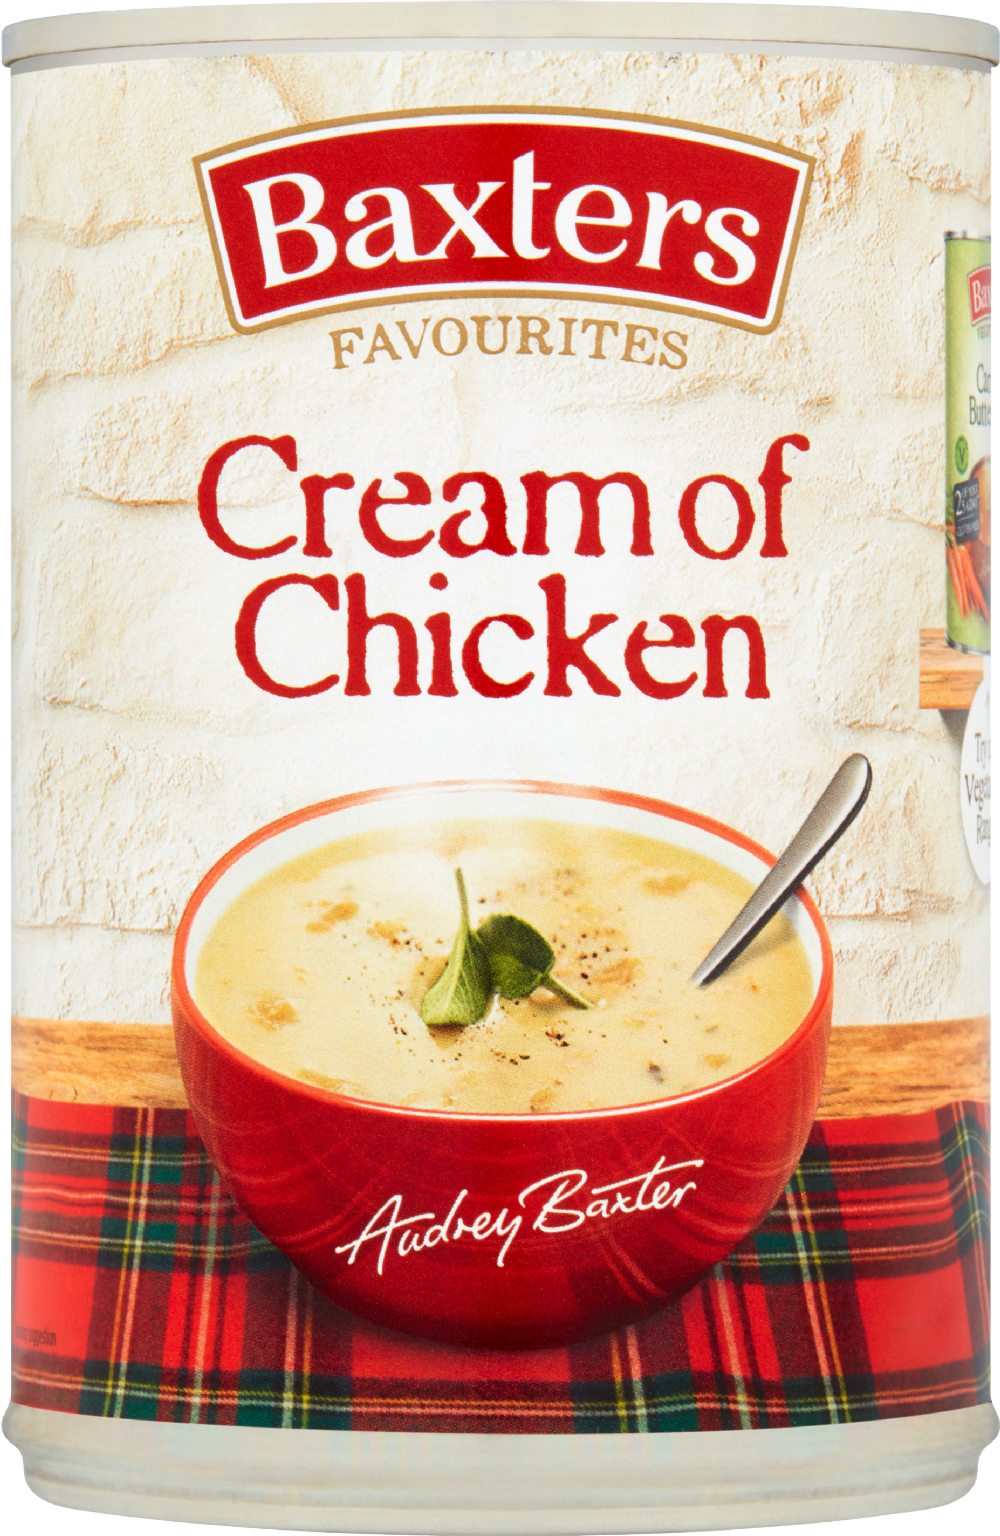 BAXTERS Favourites Cream of Chicken Soup 400g